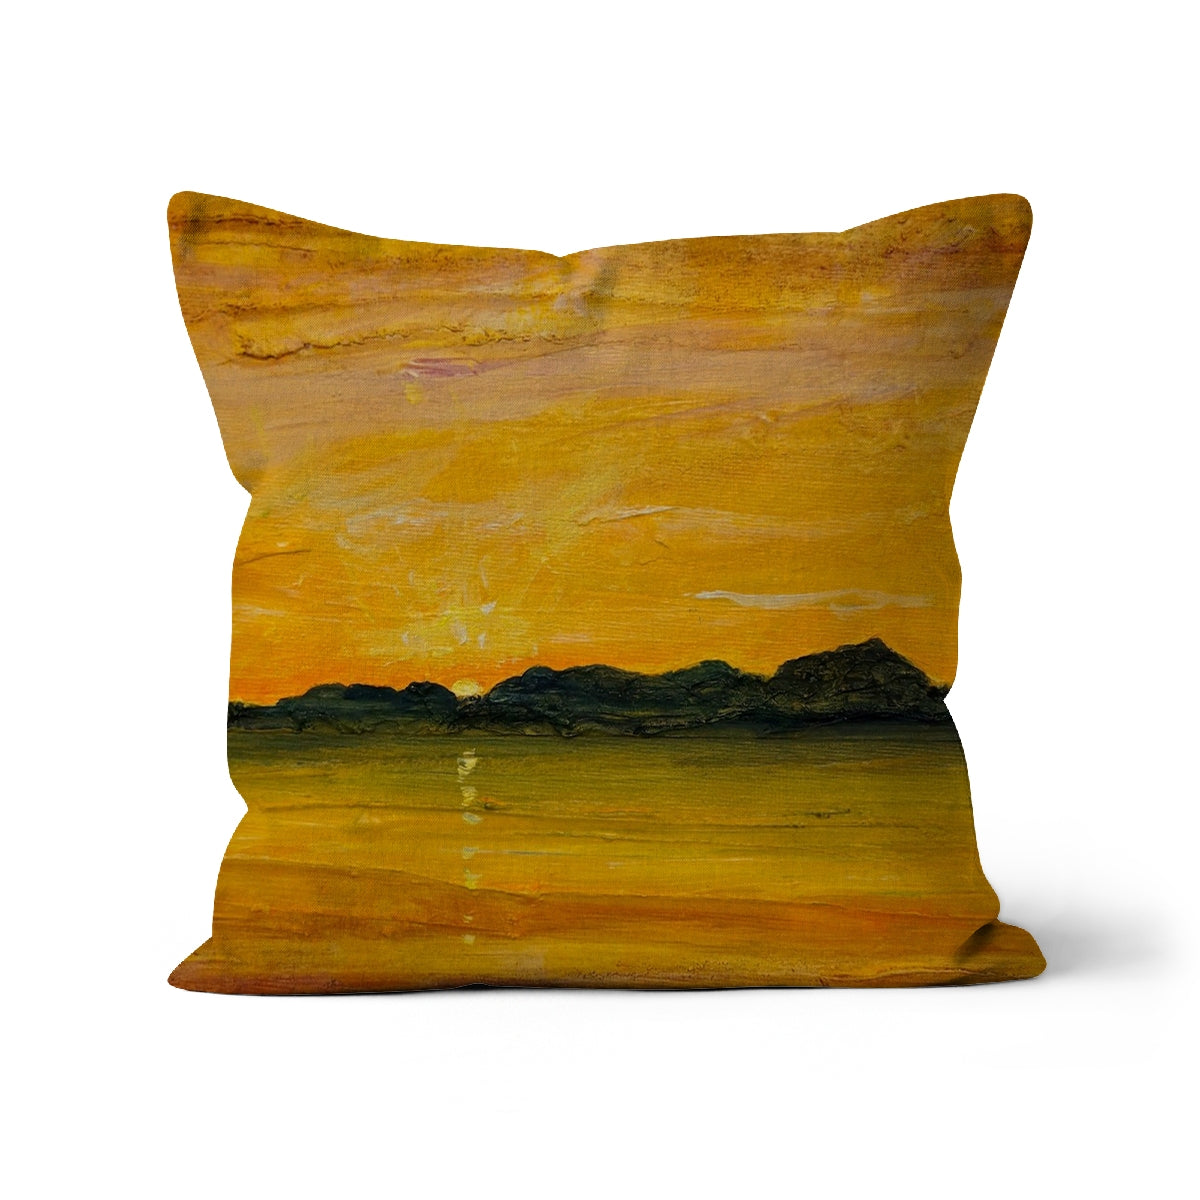 Jura Sunset Art Gifts Cushion-Cushions-Hebridean Islands Art Gallery-Canvas-16"x16"-Paintings, Prints, Homeware, Art Gifts From Scotland By Scottish Artist Kevin Hunter